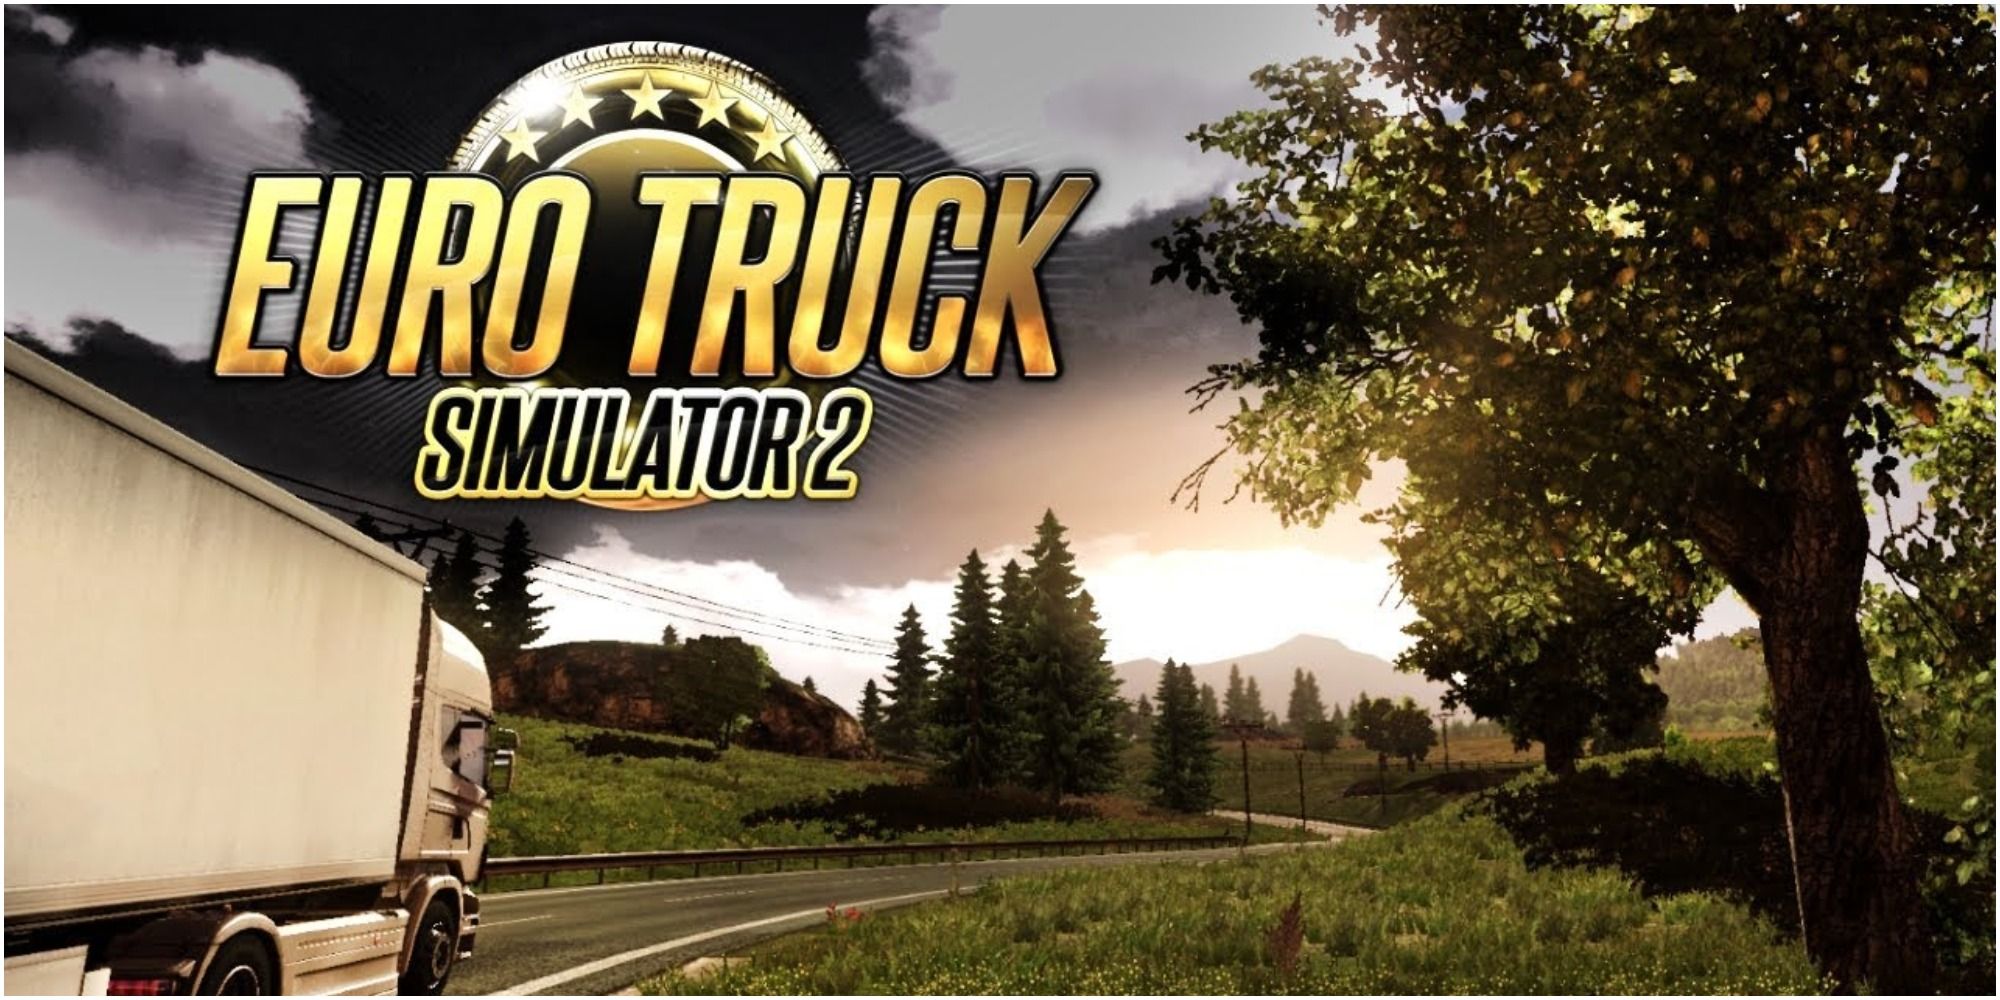 A still from the trailer for Euro Truck Simulator 2